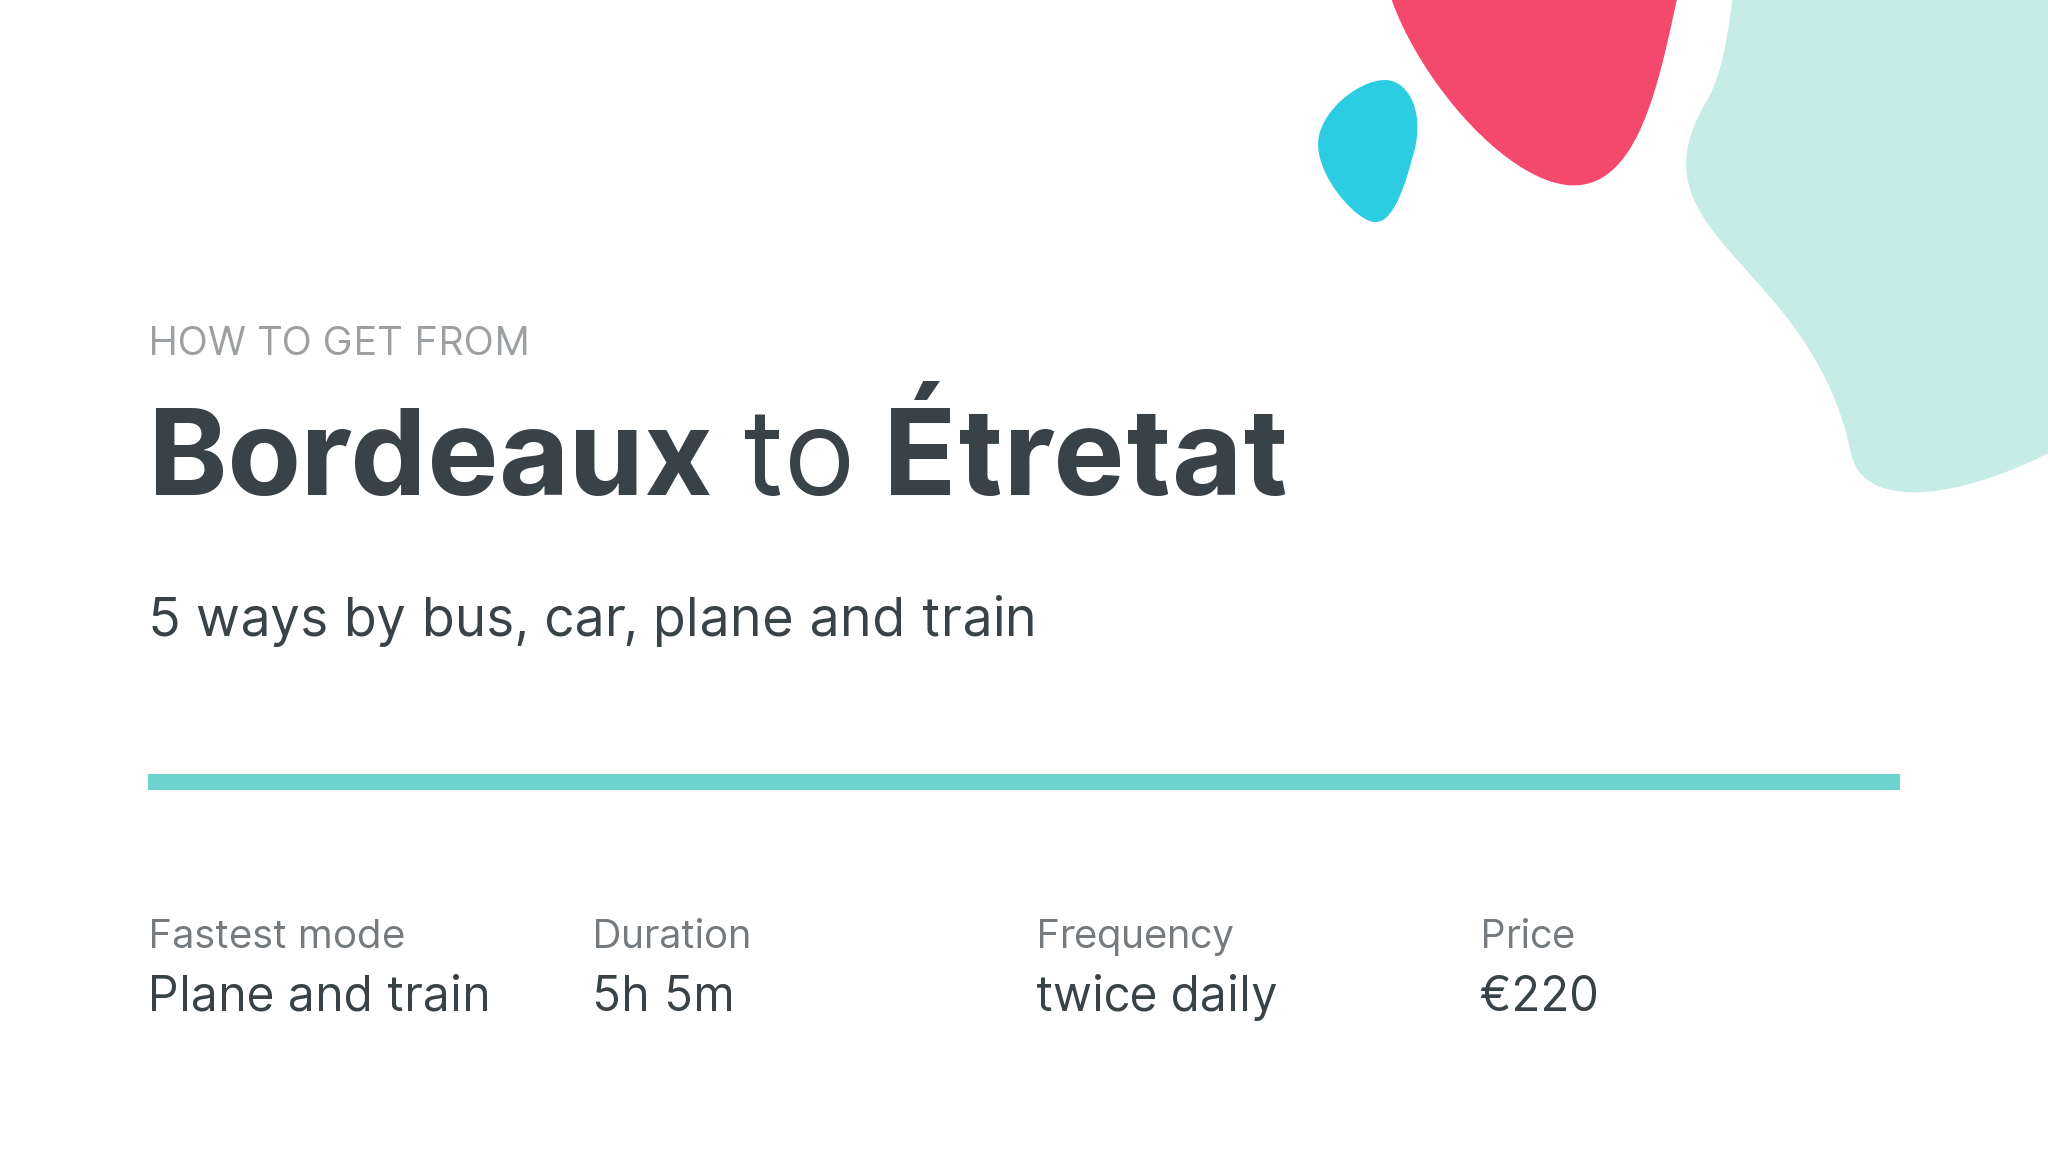 How do I get from Bordeaux to Étretat